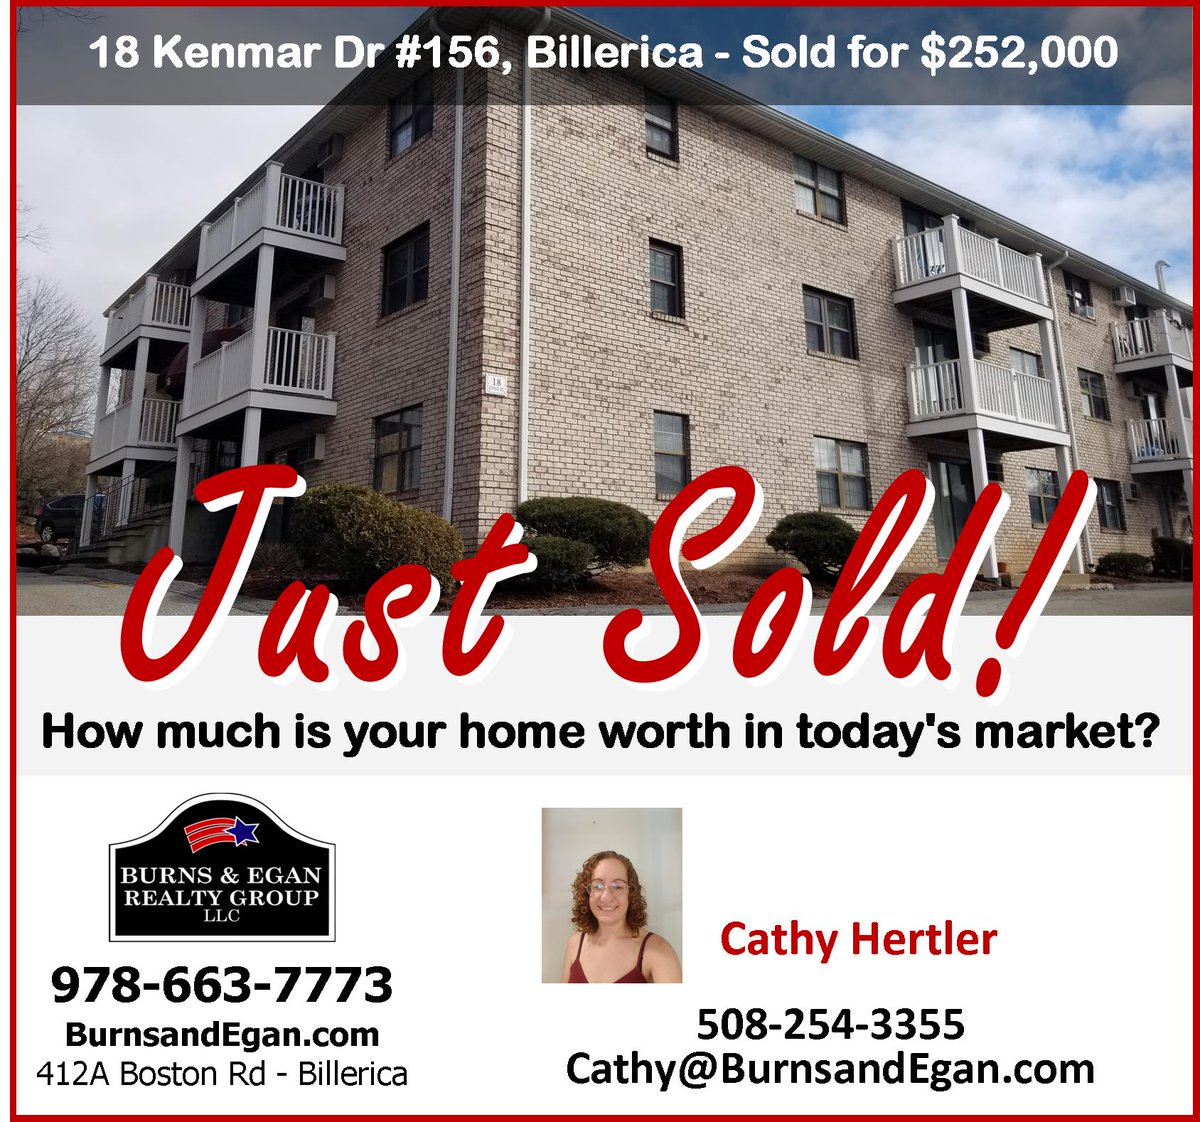 JUST SOLD! 18 Kenmar Dr Unit #156, Billerica ~ Sold for $252,000 ~ How much is your home worth in today's market? 
#Billericarealestate #burnsandegan #Justsold #homeownership #homeownershipgoals #realestate #billericahomes #billerica #realestatemarket #billericama #condo